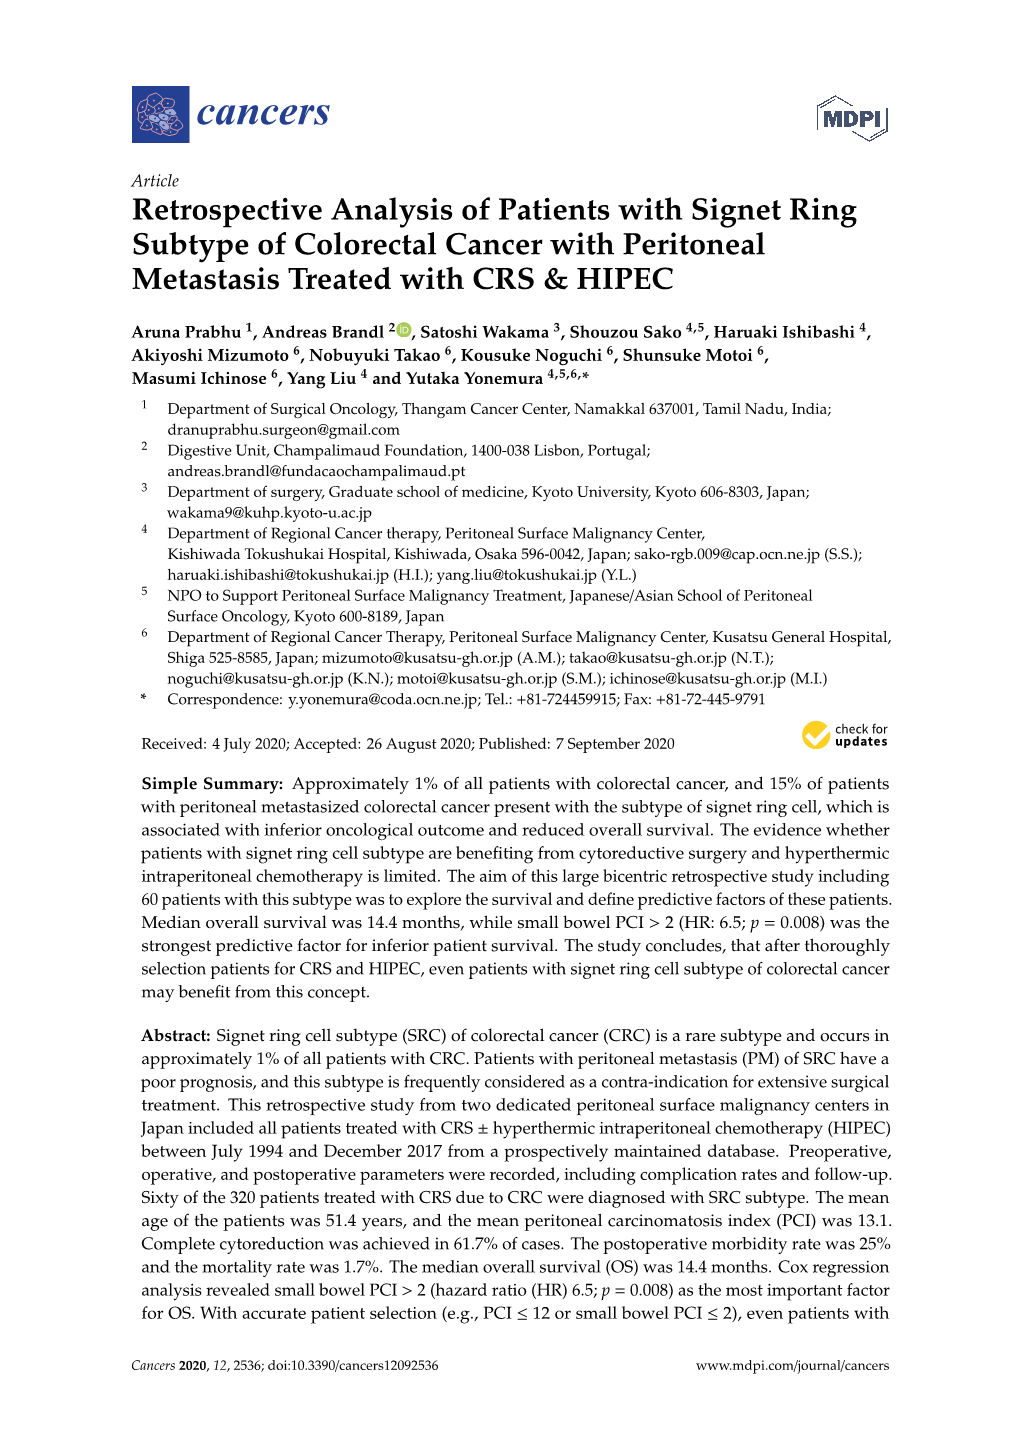 Retrospective Analysis of Patients with Signet Ring Subtype of Colorectal Cancer with Peritoneal Metastasis Treated with CRS & HIPEC